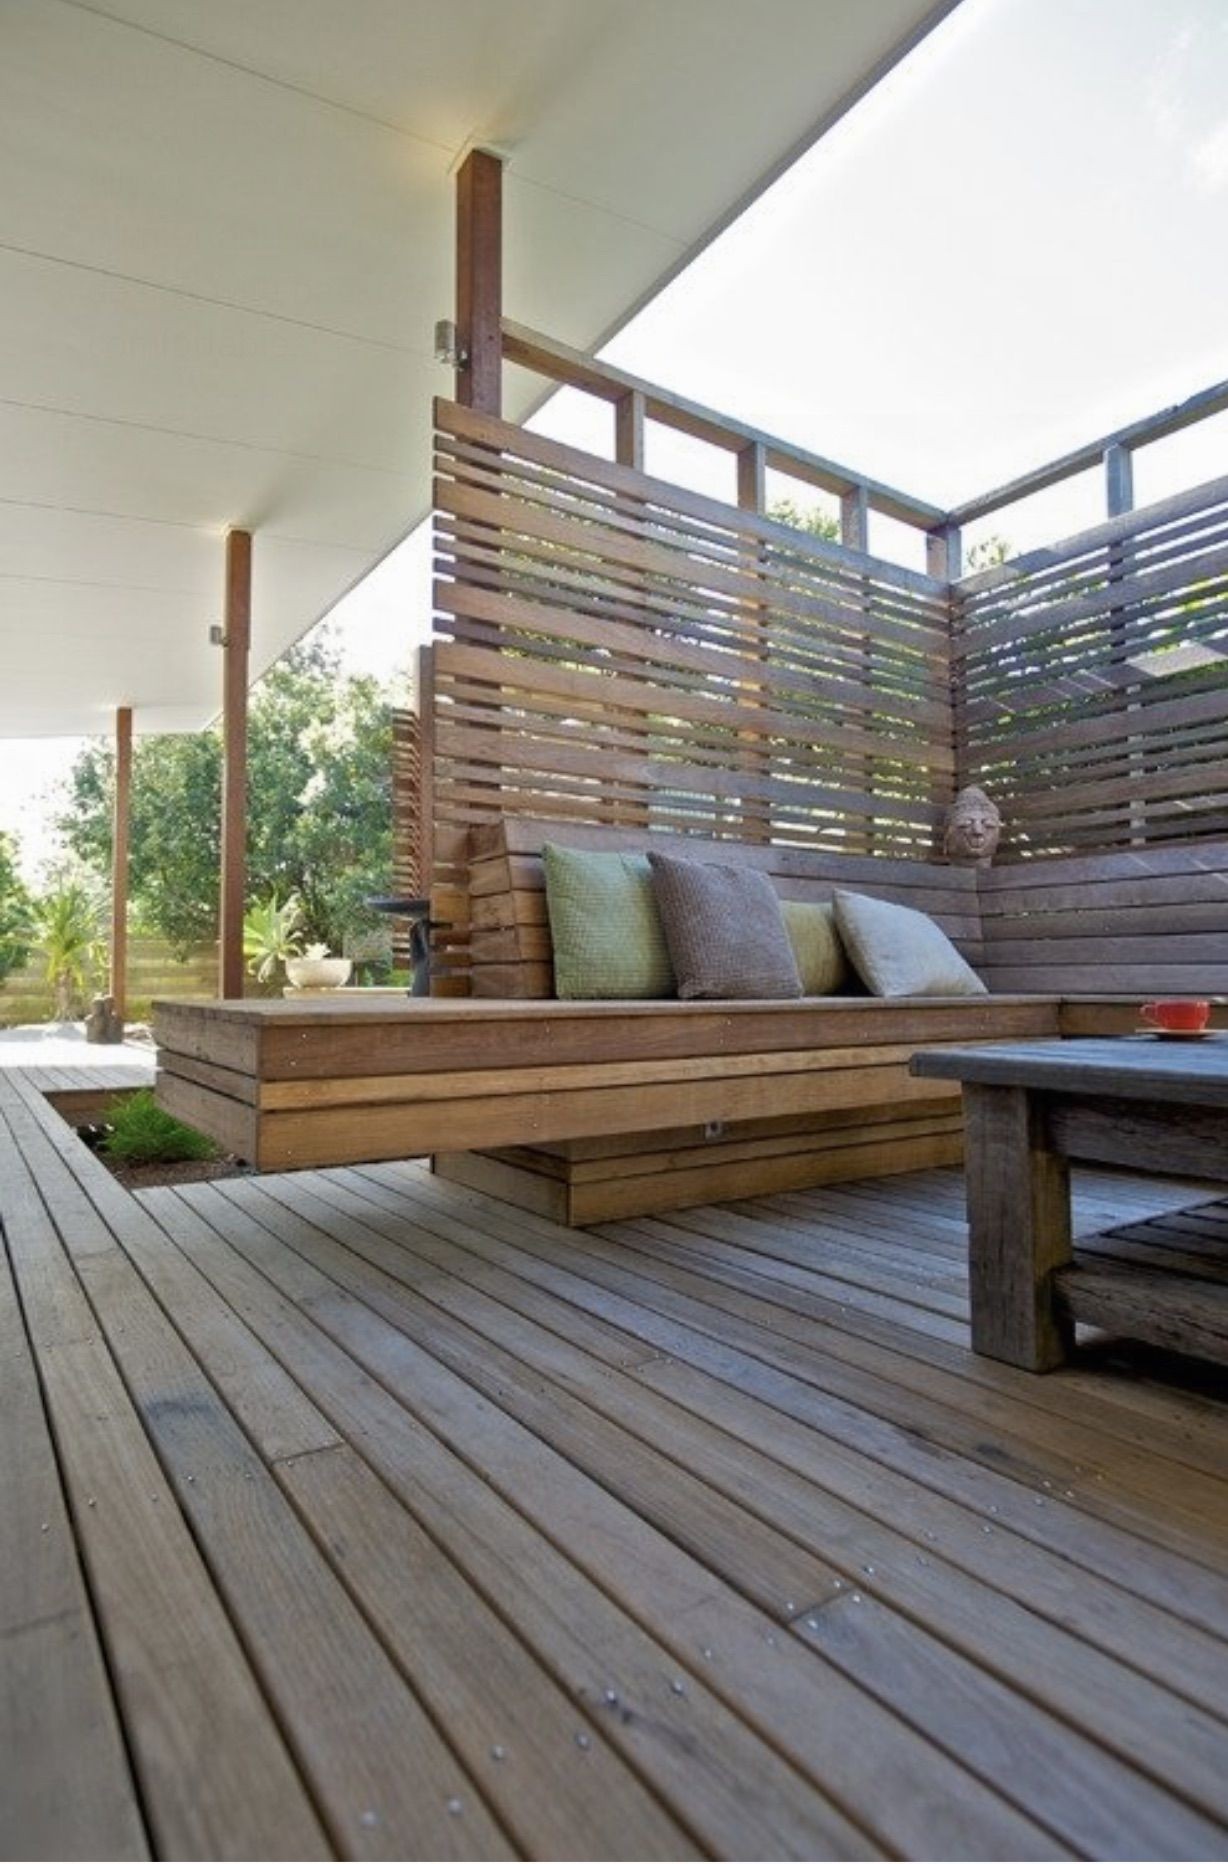 Great design on this deck privacy screen and bench seats